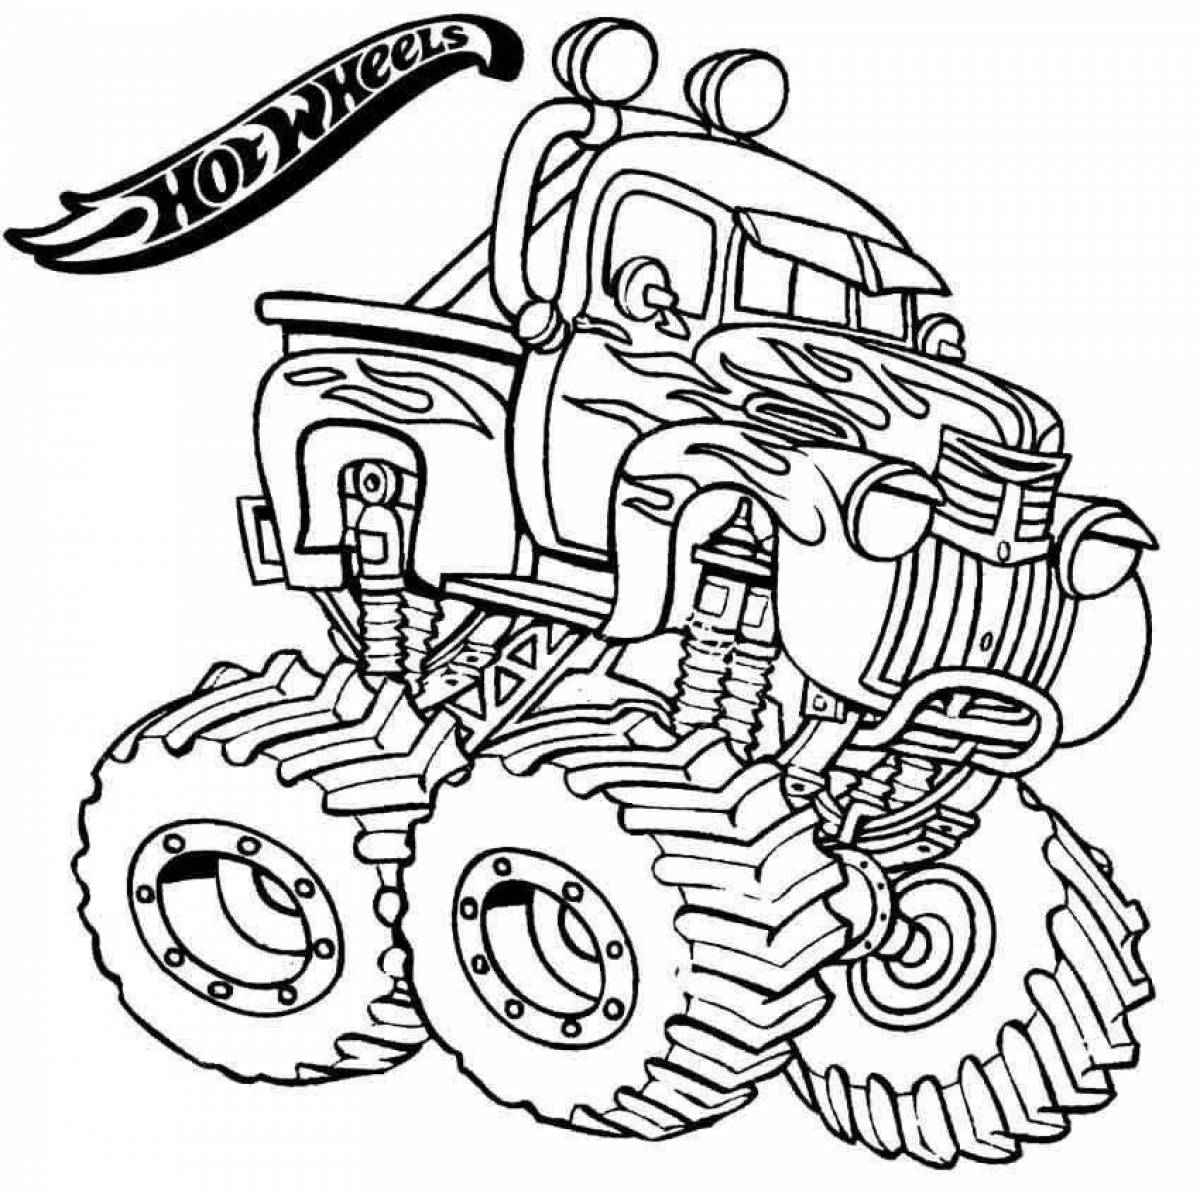 Glamorous monster truck coloring page for kids